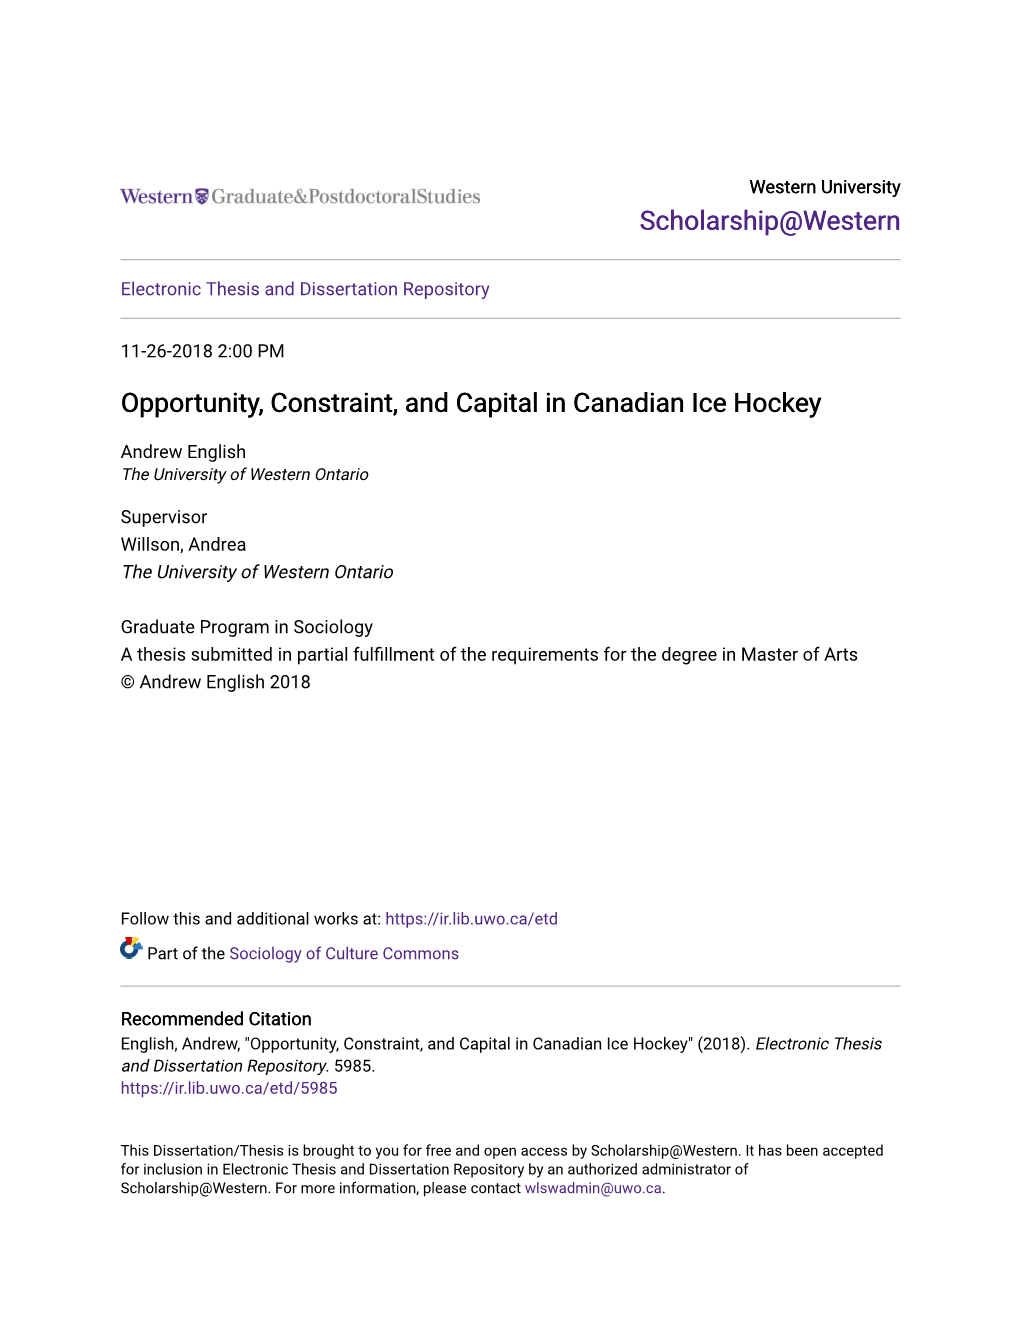 Opportunity, Constraint, and Capital in Canadian Ice Hockey